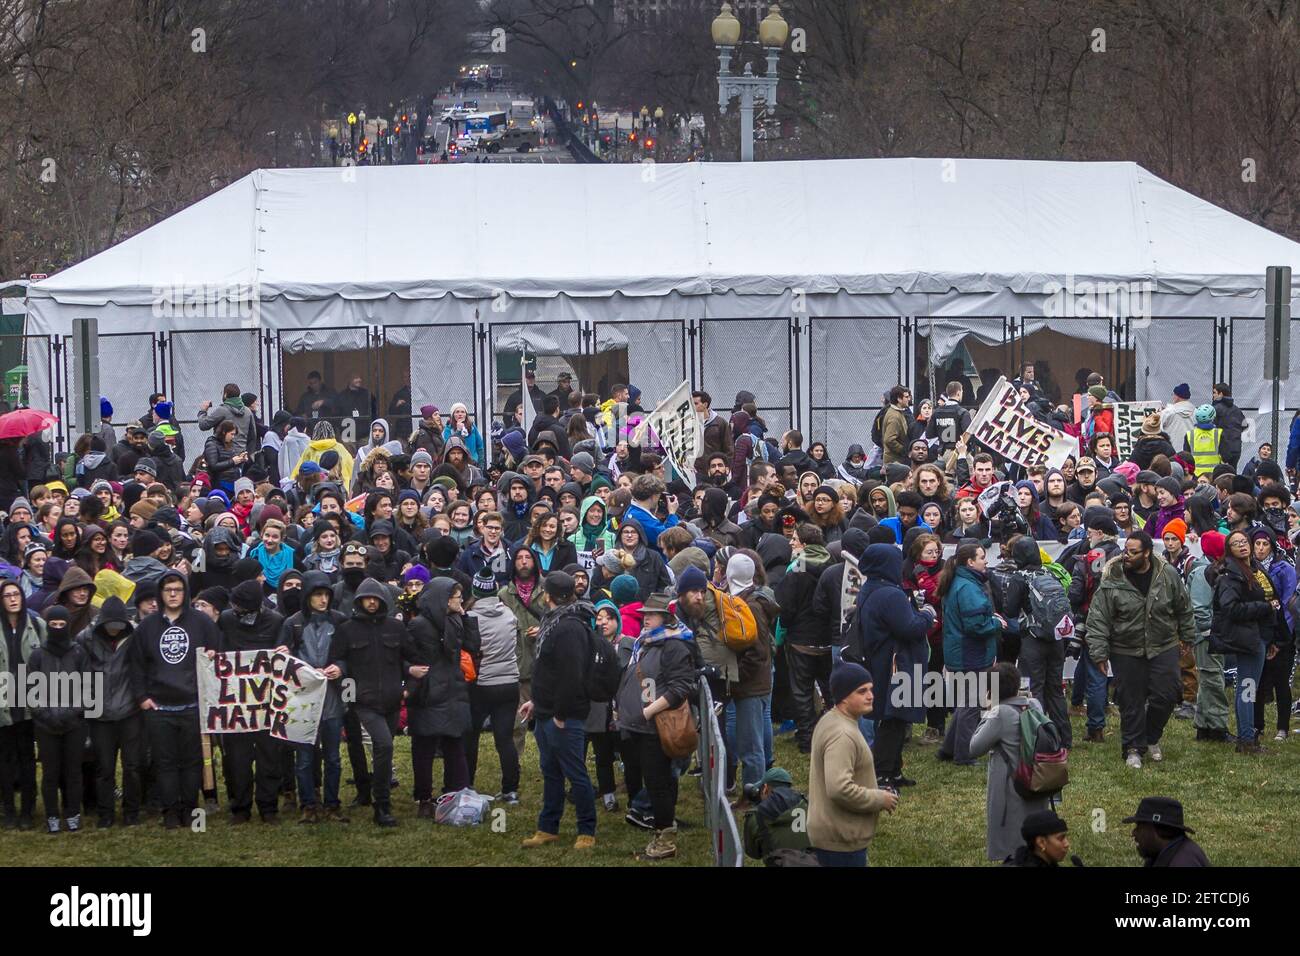 Dozens of people protest before the inauguration of President-elect Donald J. Trump in Washington, D.C., on January 20 2017. (Photo by Michael Nigro) *** Please Use Credit from Credit Field *** Stock Photo